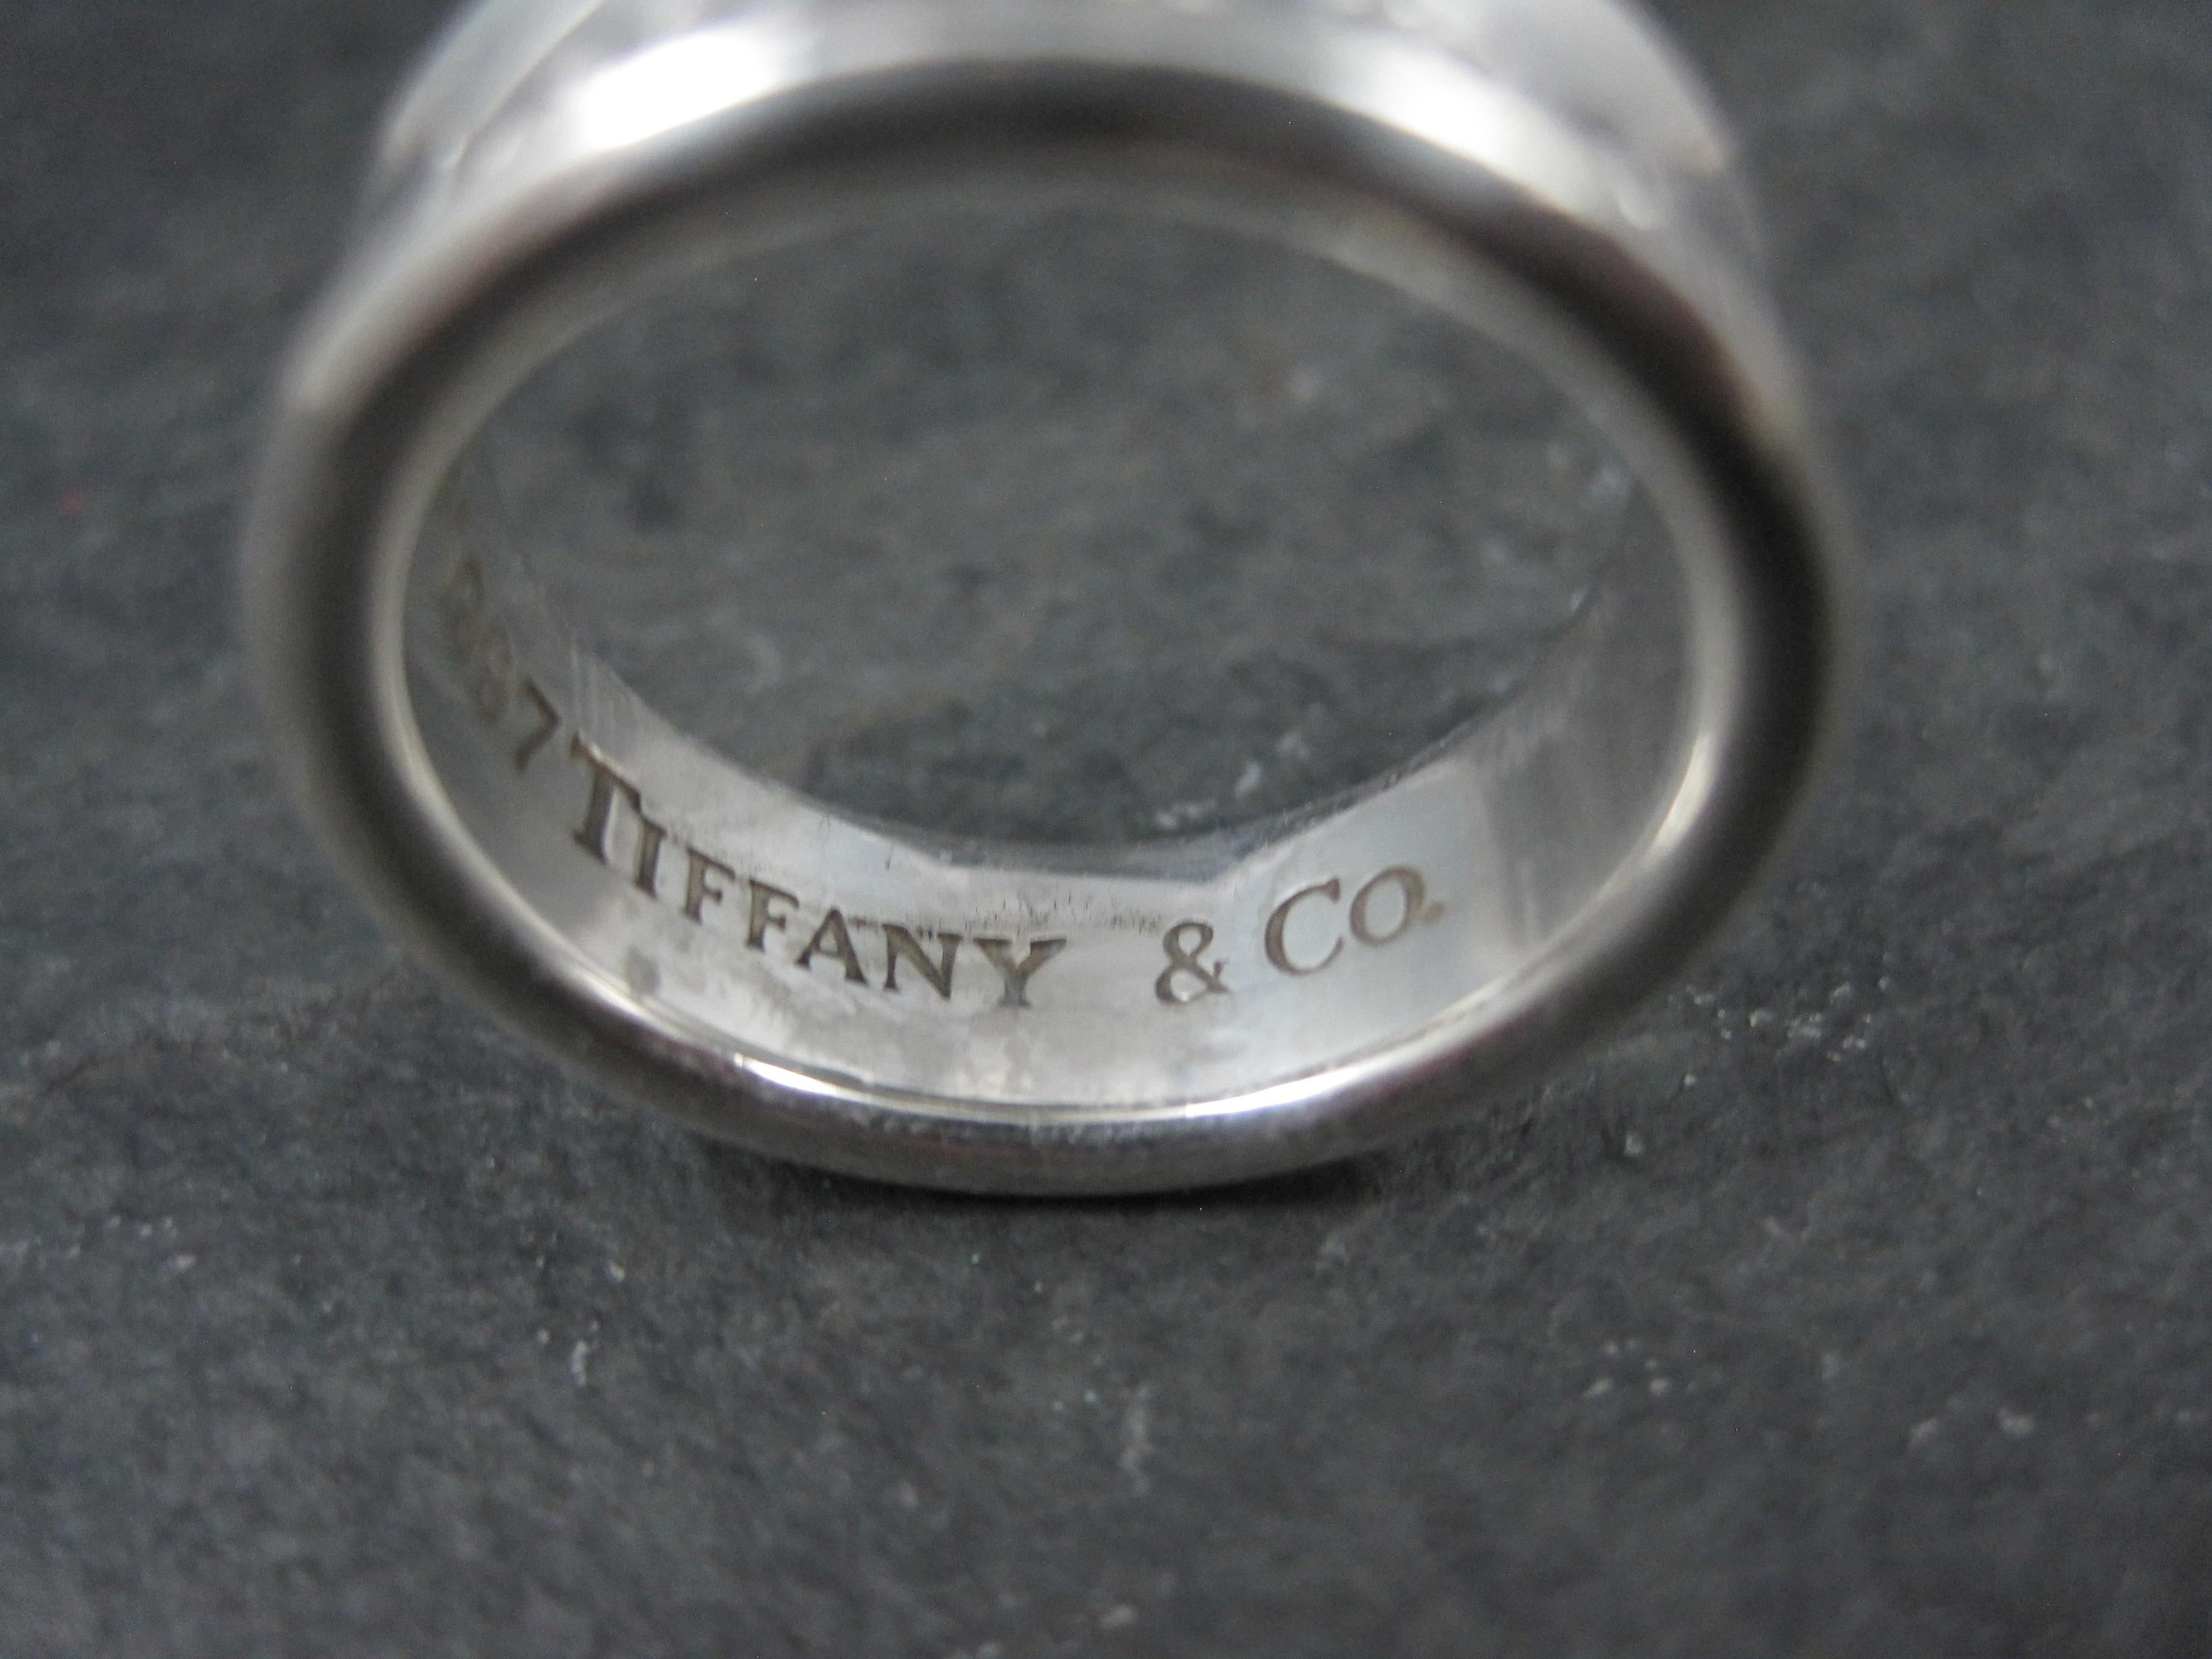 1997 Tiffany & Co 1837 Band Ring Sterling Silver Size 6.5 For Sale 5